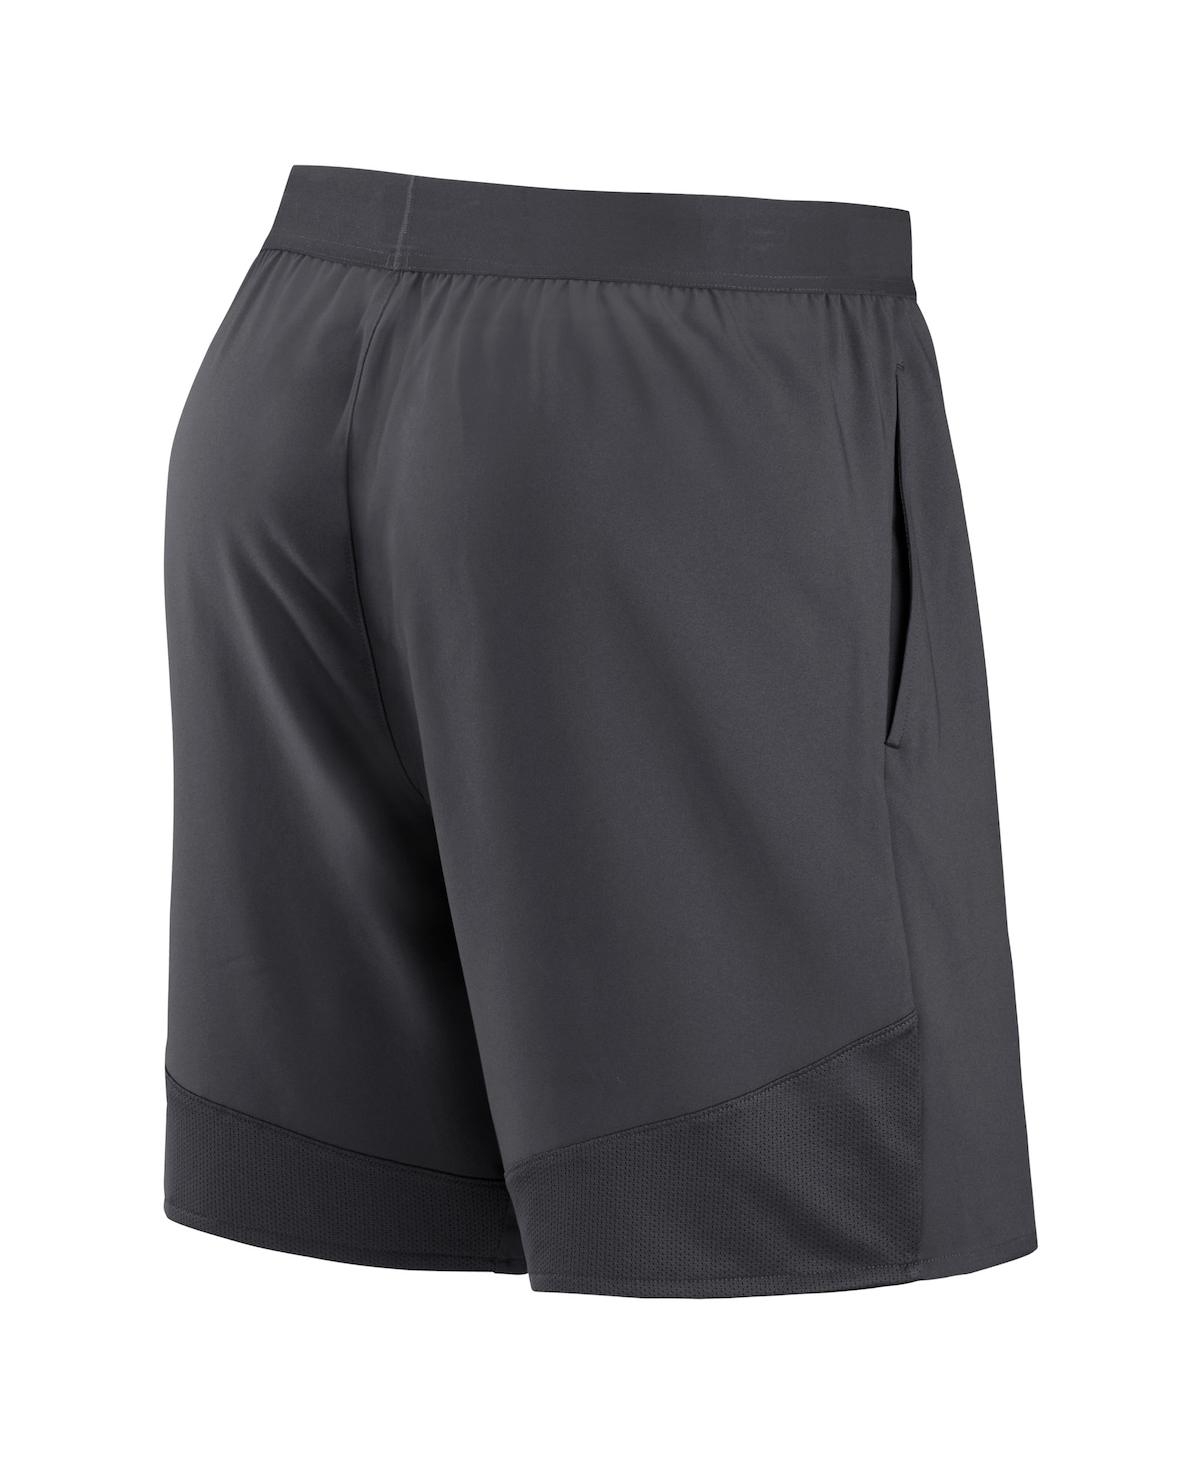 Shop Nike Men's  Anthracite New England Patriots Stretch Performance Shorts